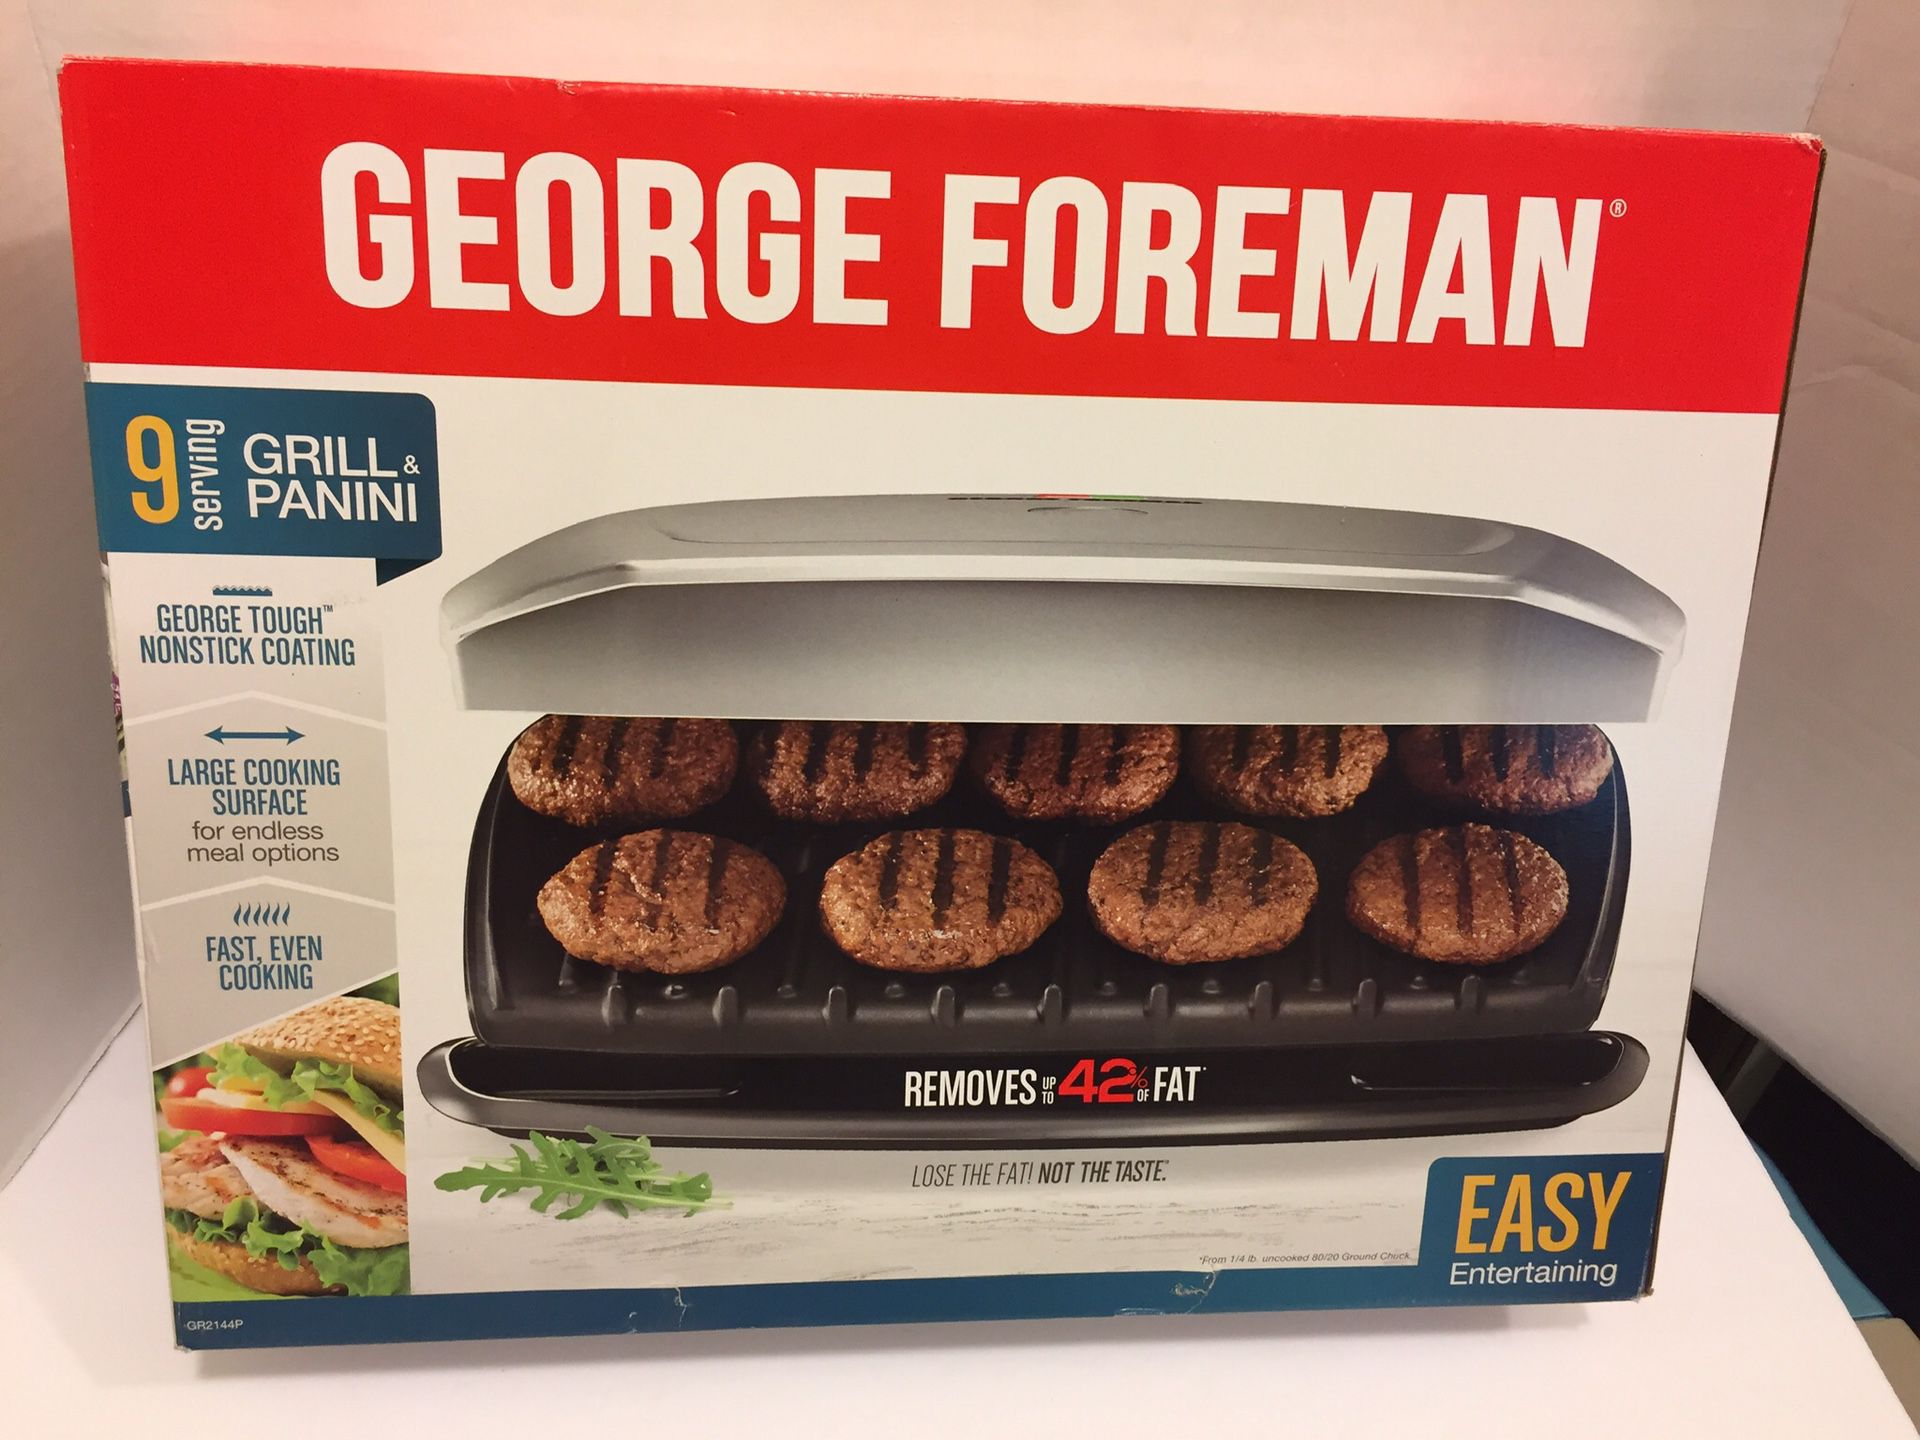 New! Grill and Panini by George Foreman